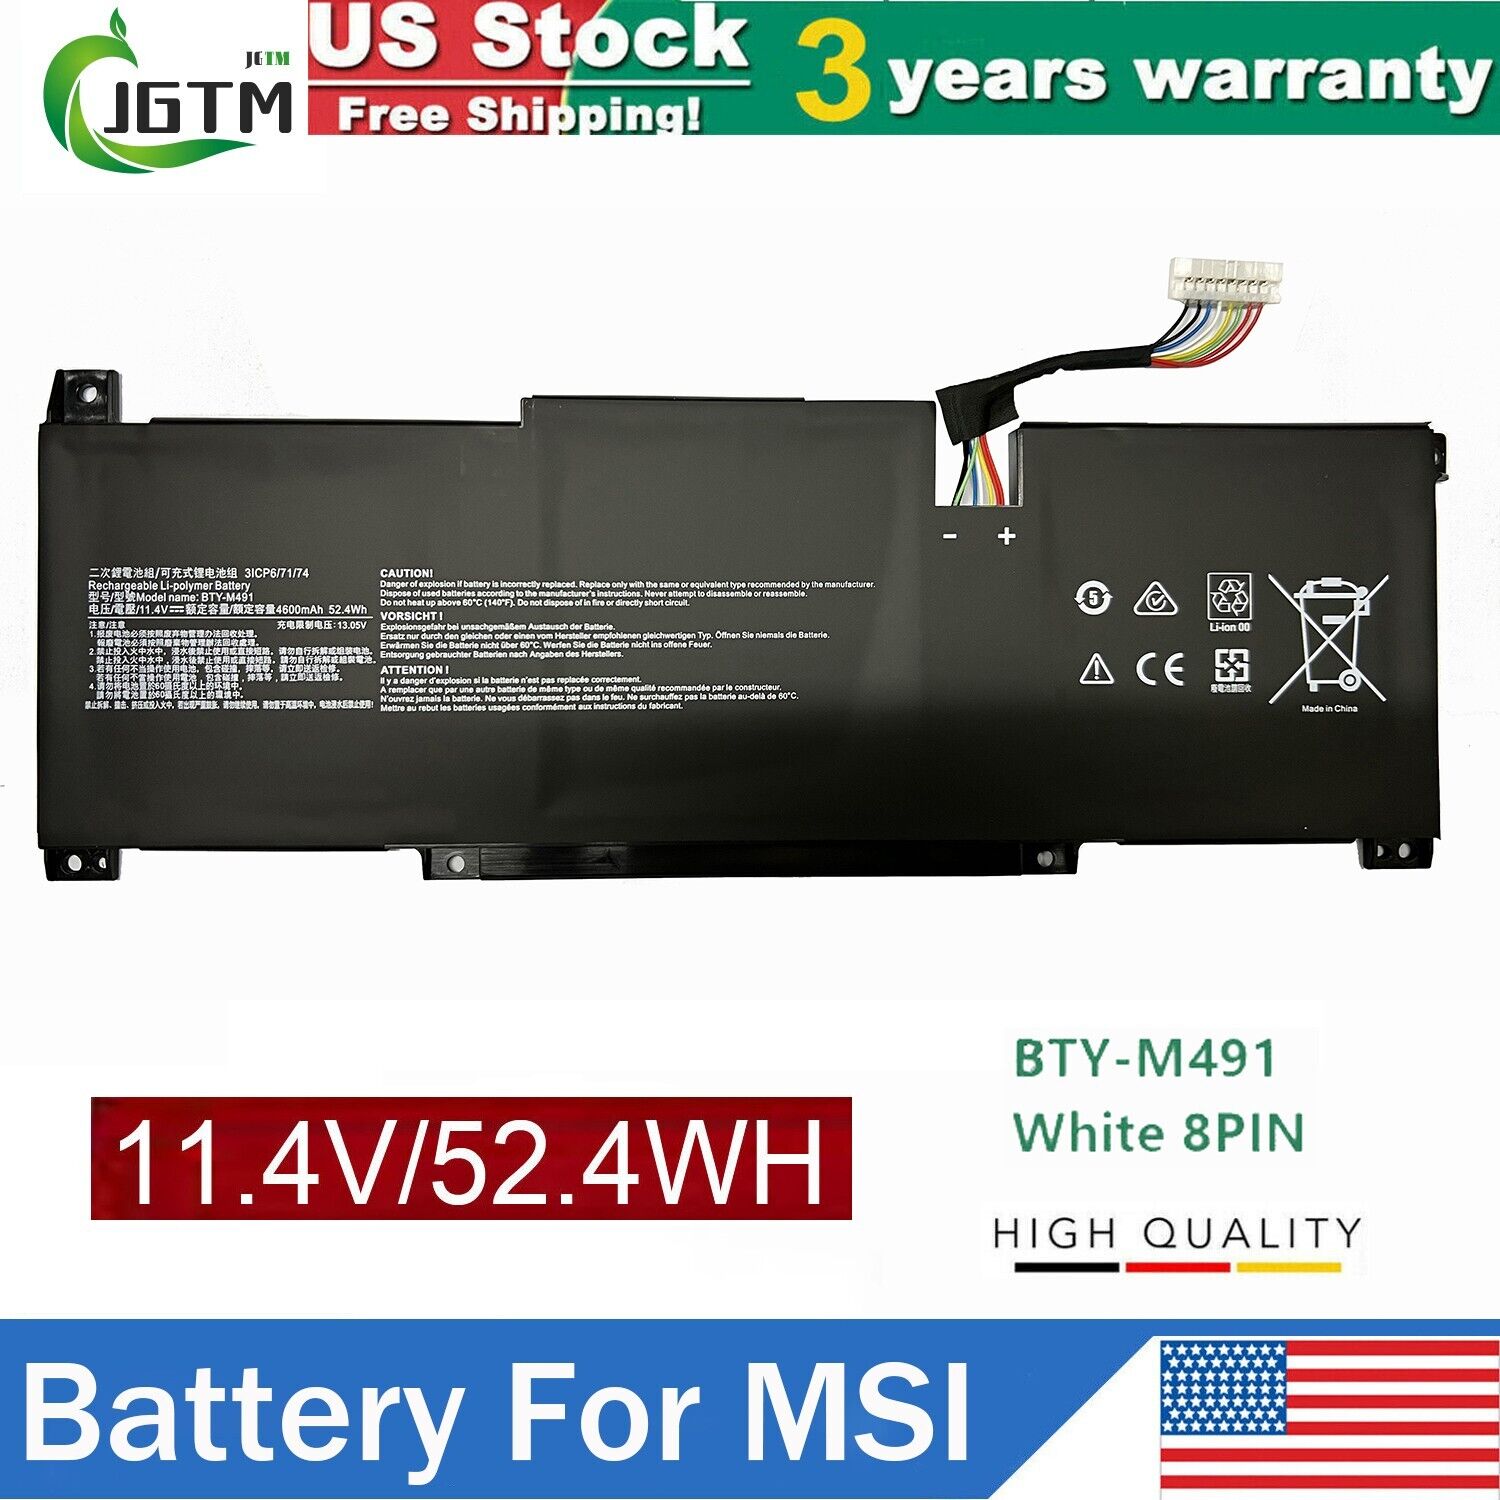 BTY-M491 Battery For MSI Modern 15 A10M A11M Summit B15 A11M US White Connector